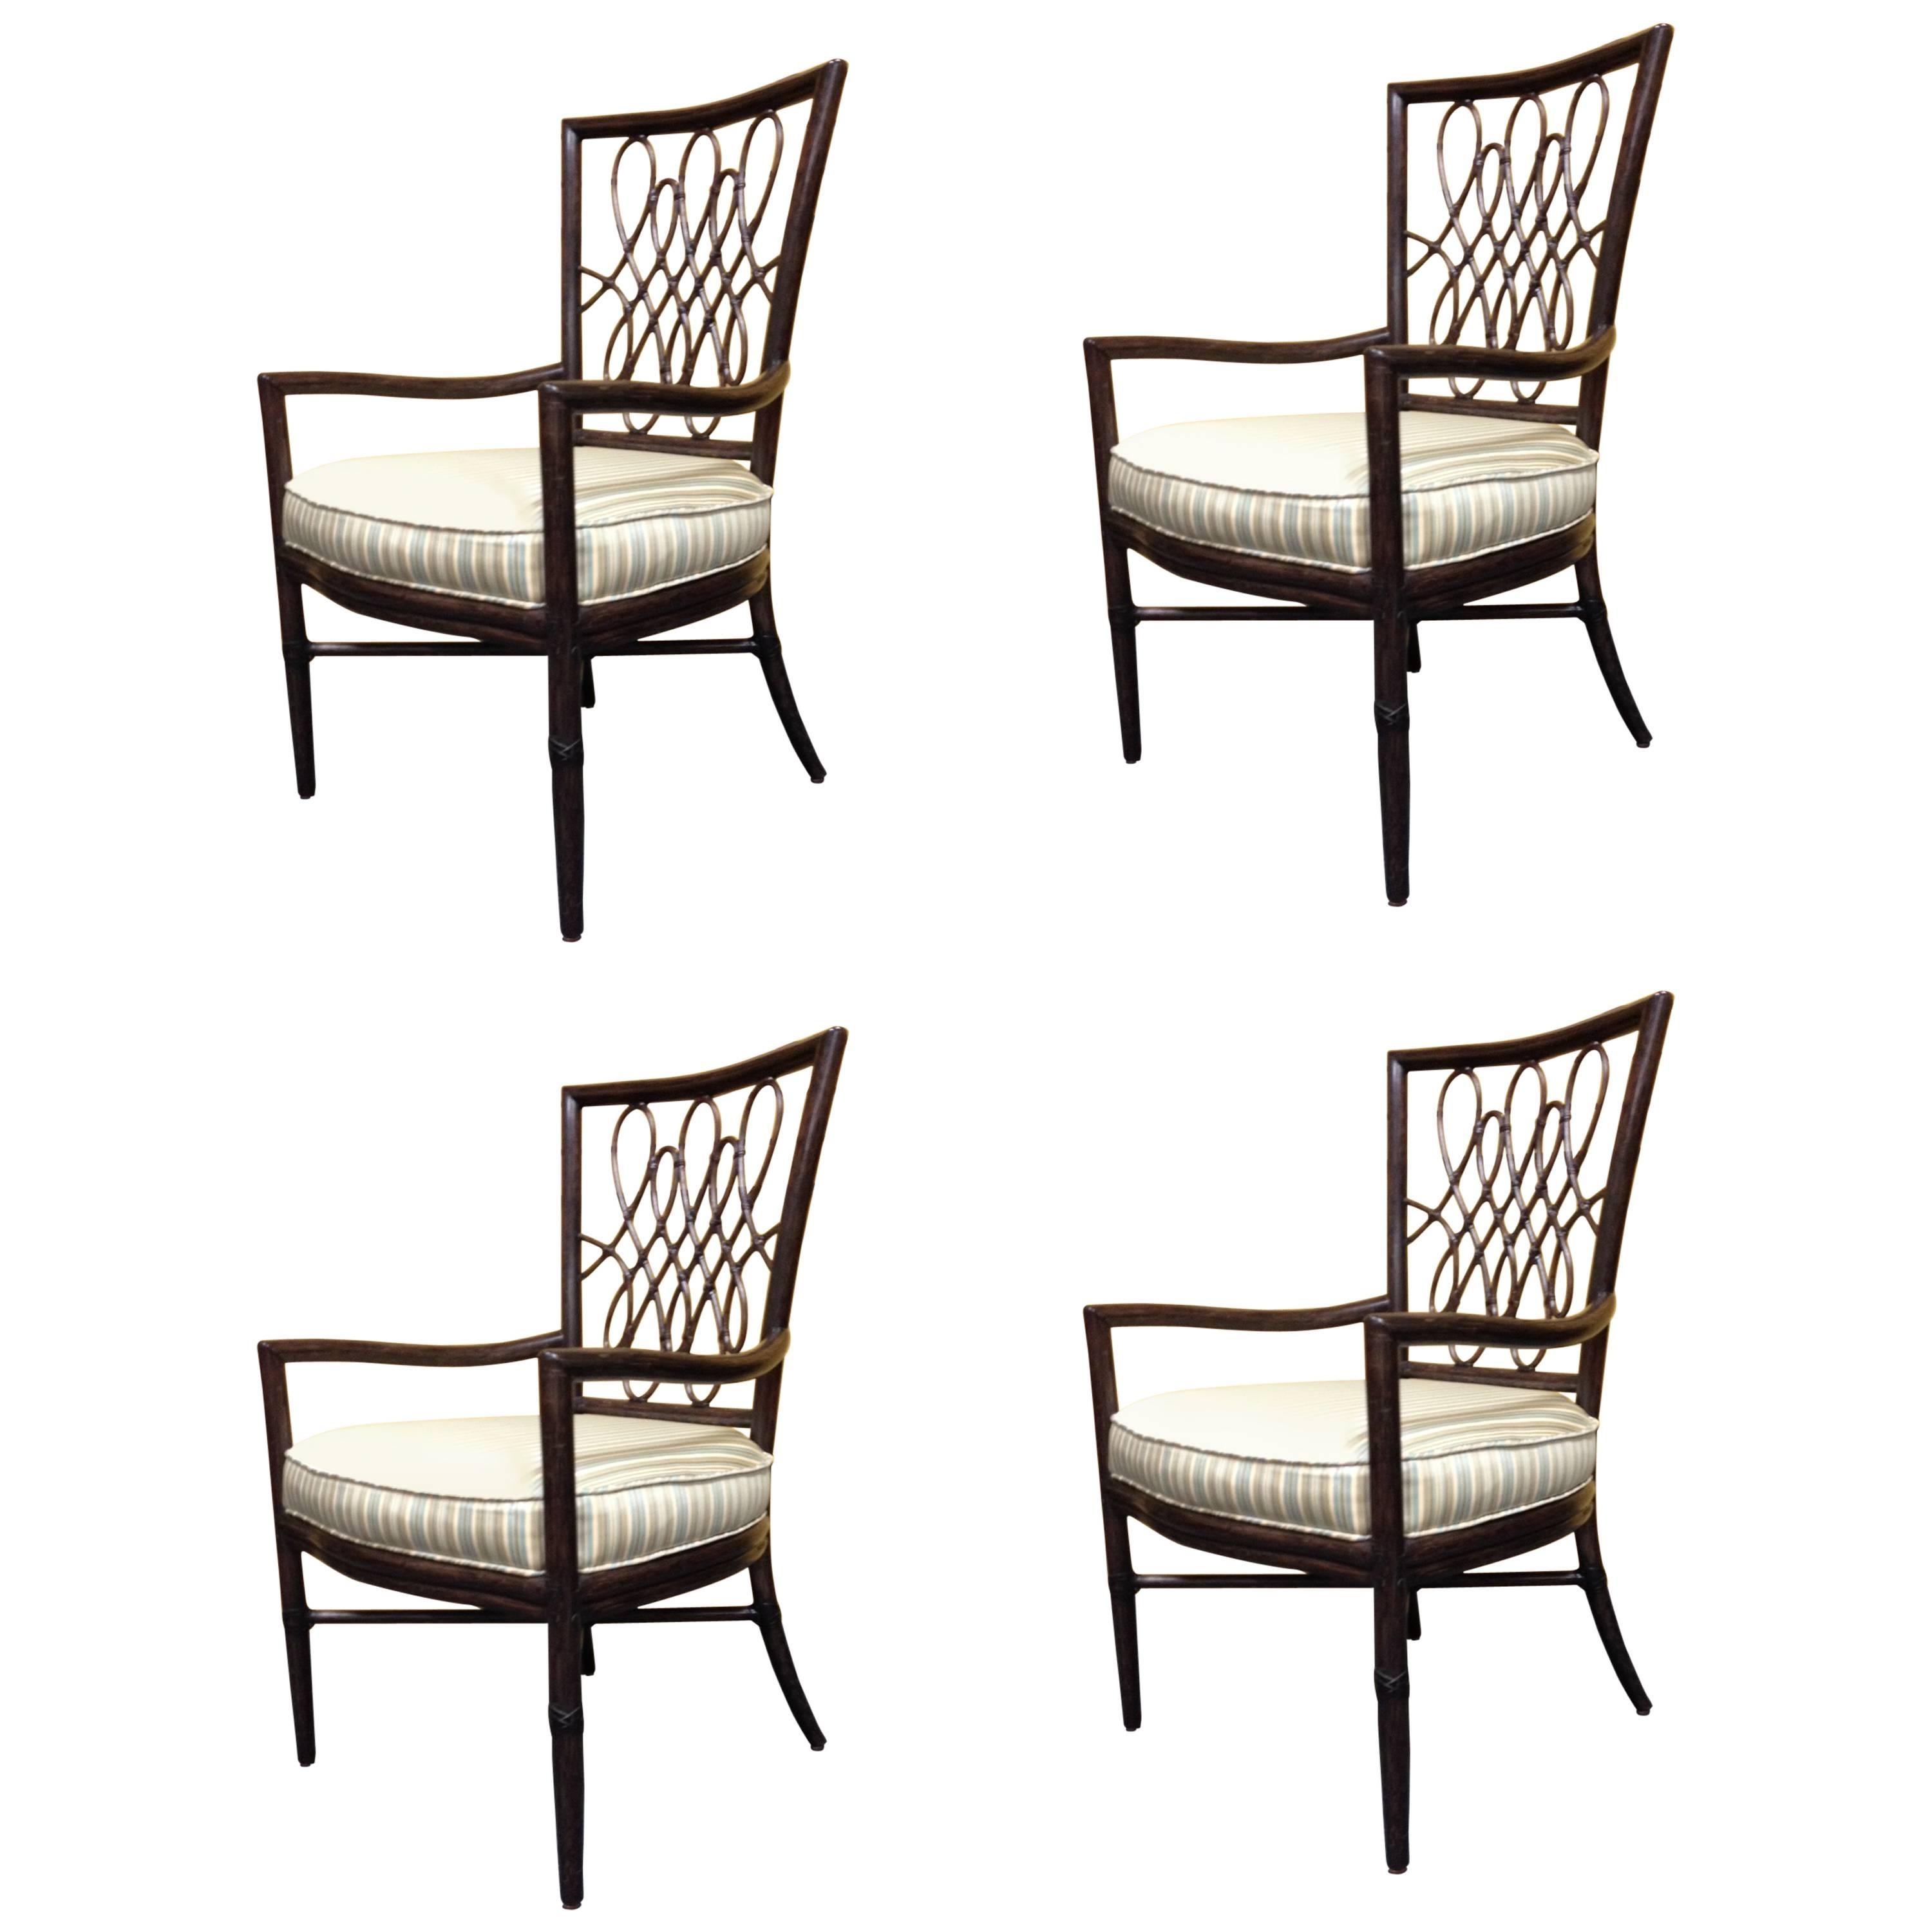 Set of Four Barbara Barry Bamboo Dining Chairs by McGuire